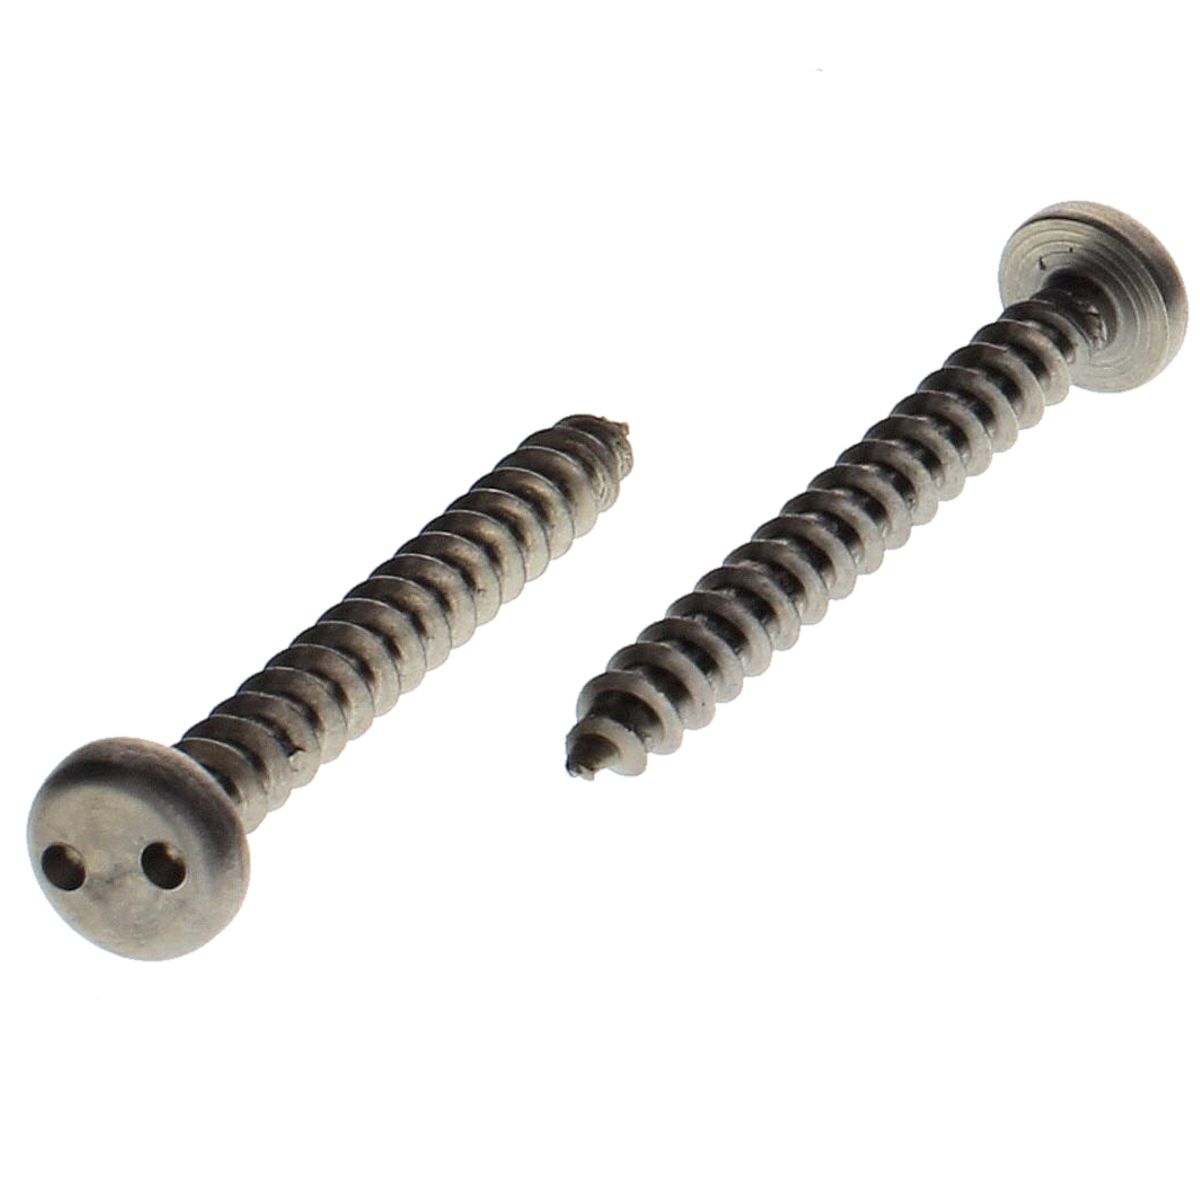 #12 x 1" Pan Head Spanner Security Tapping Screws — 18-8 Stainless Steel, 100/PKG